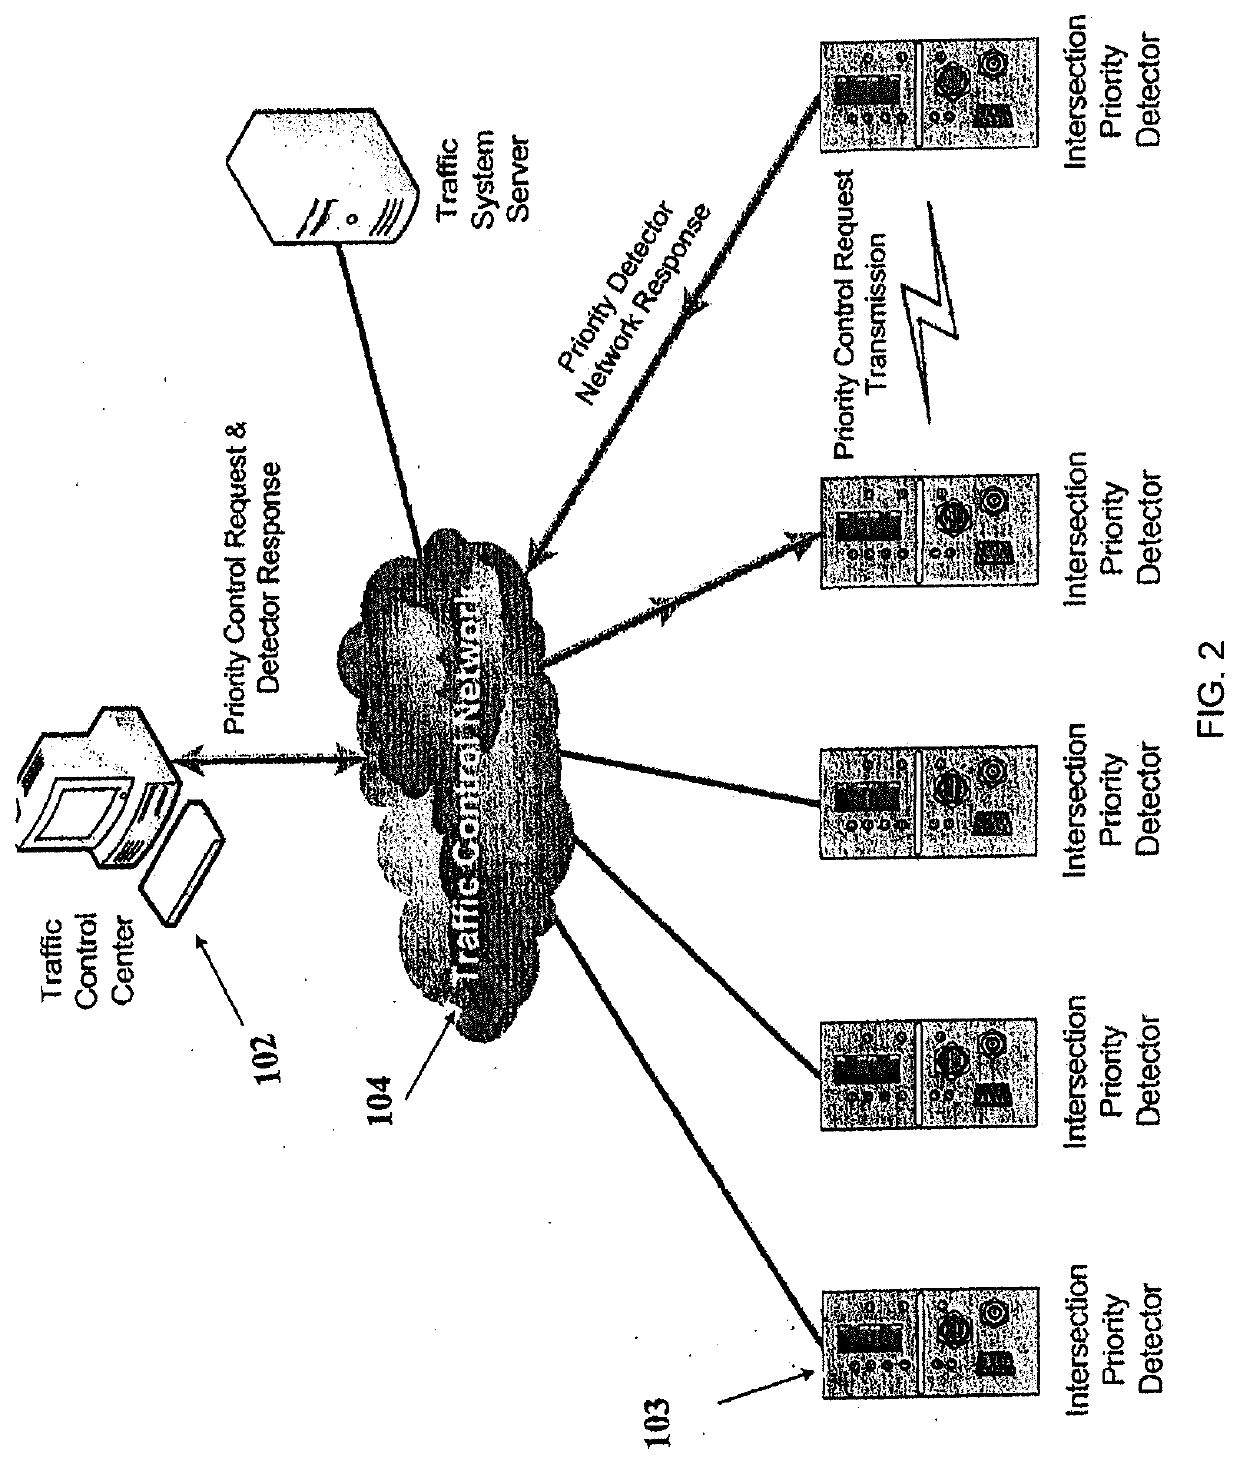 Systems and methods to temporarily alter traffic flow